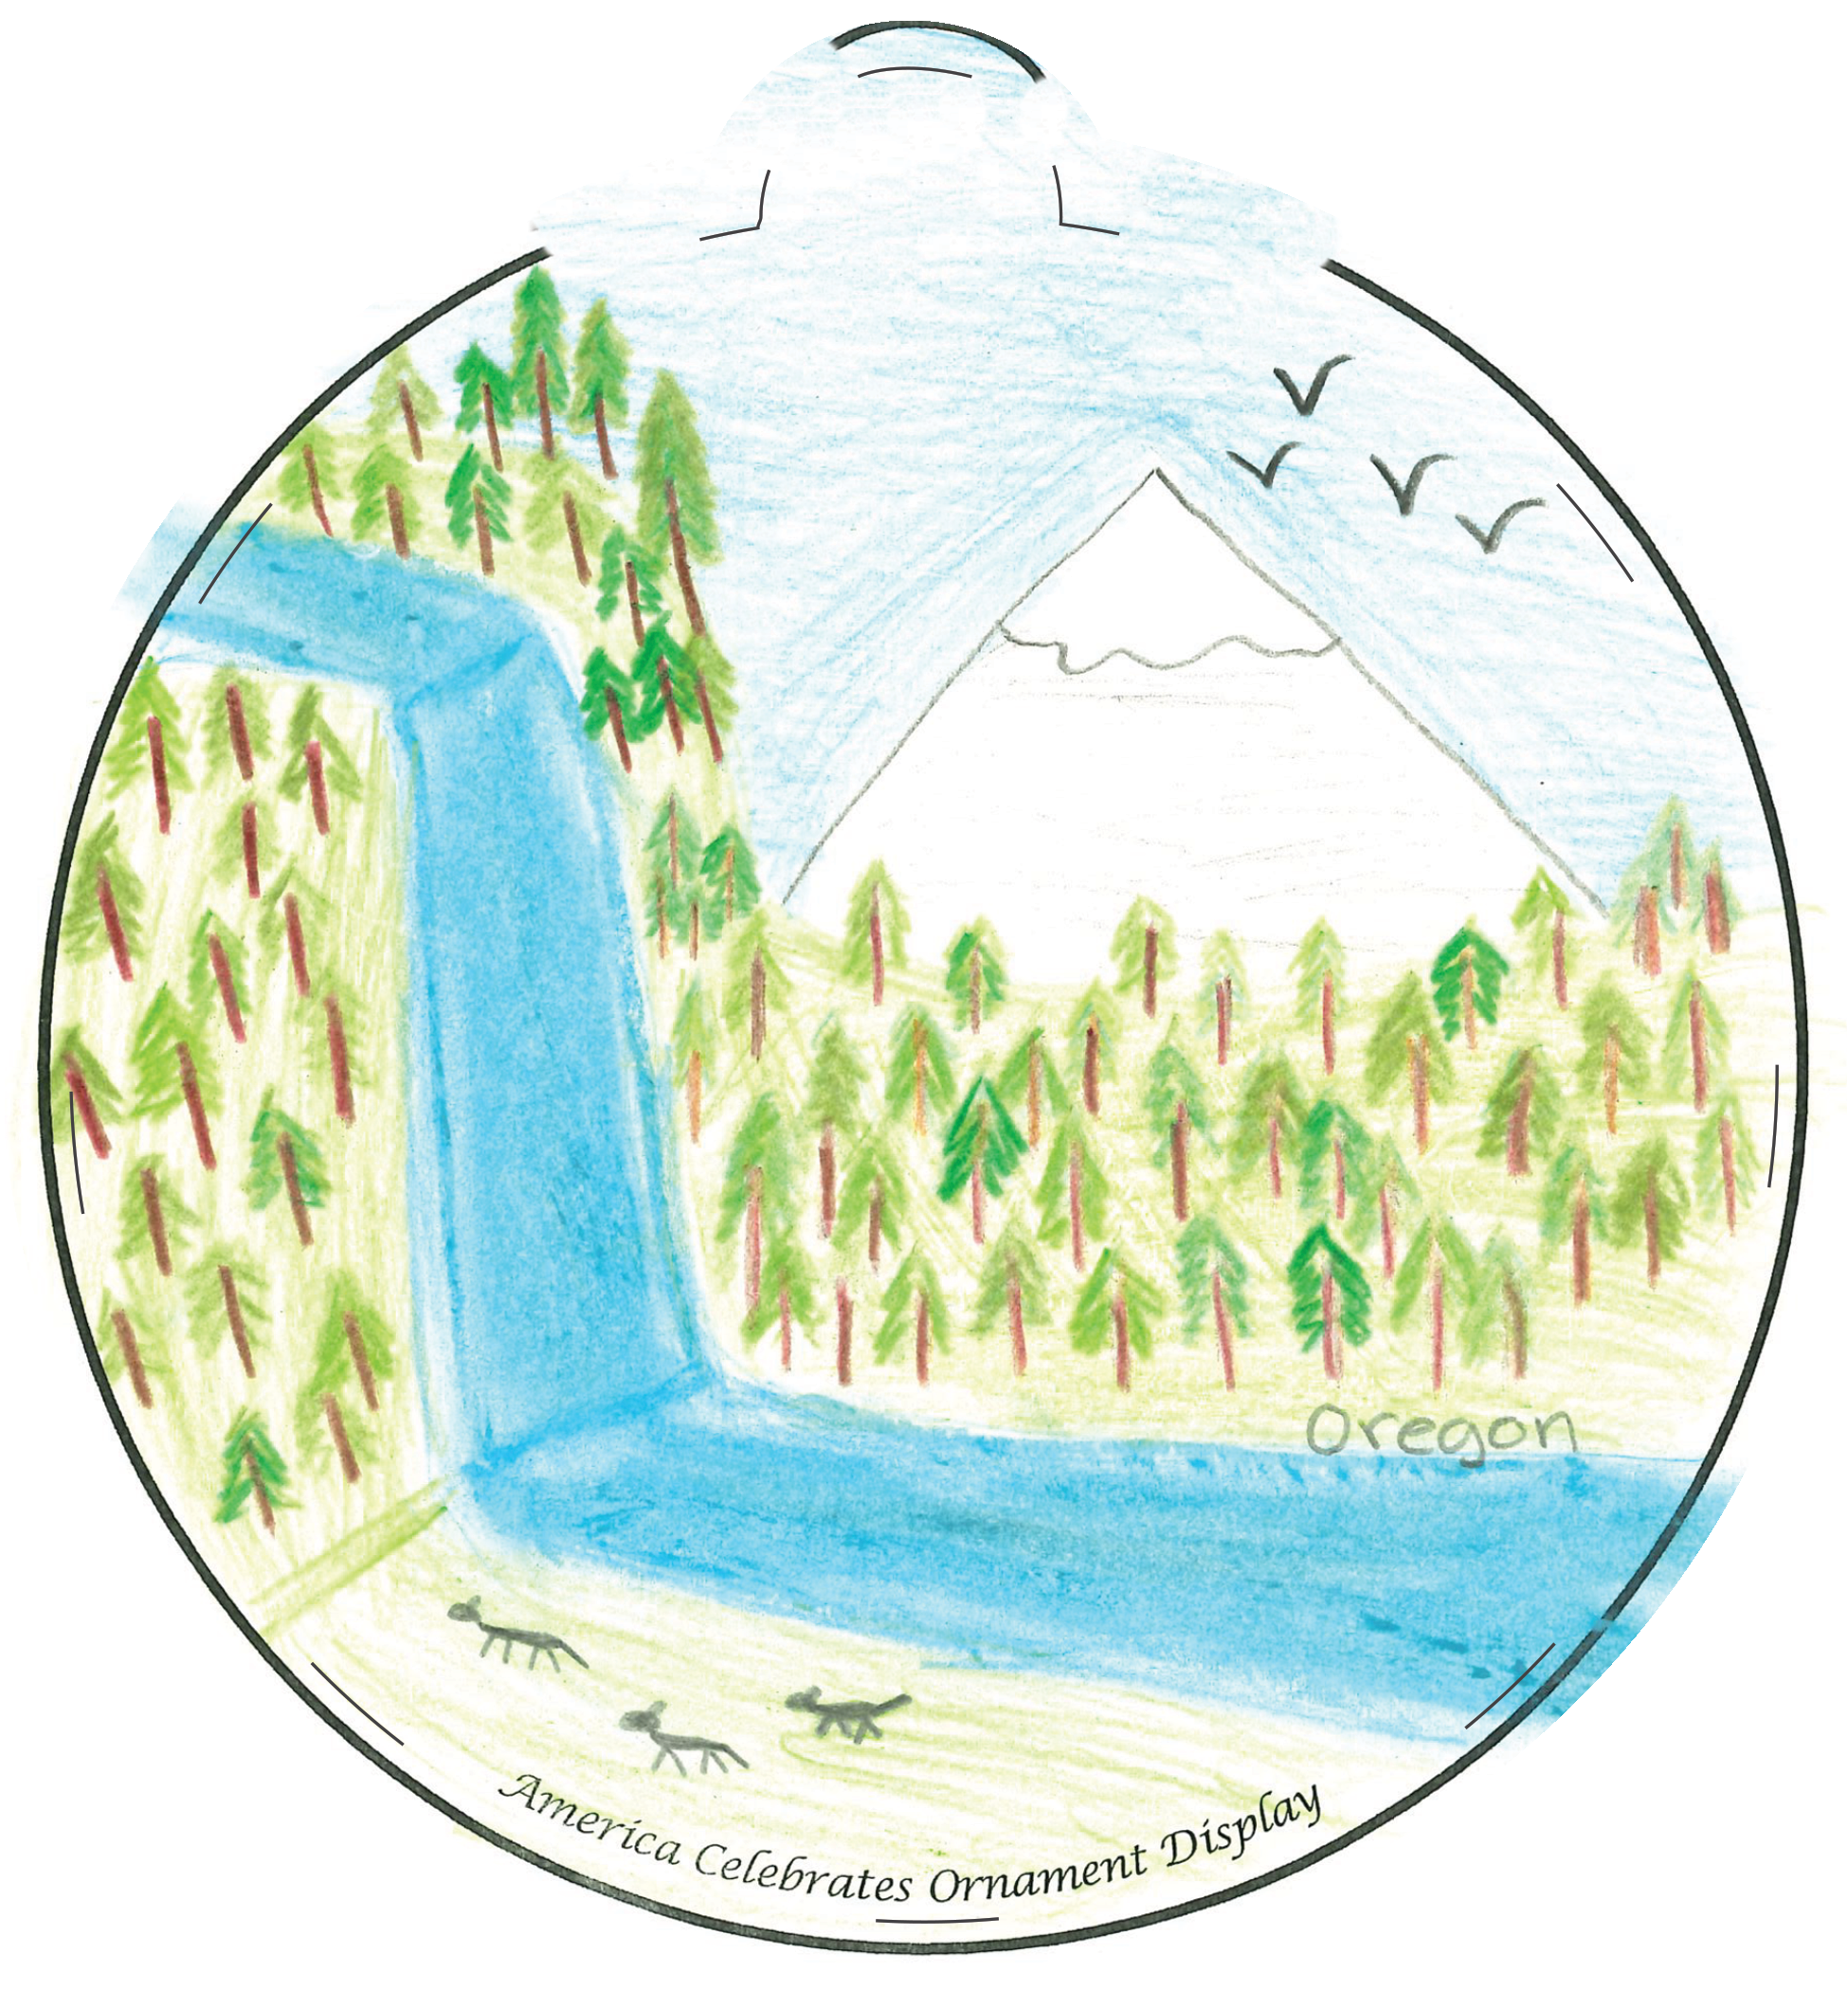 Ornament depicting a waterfall and a mountain in the distance